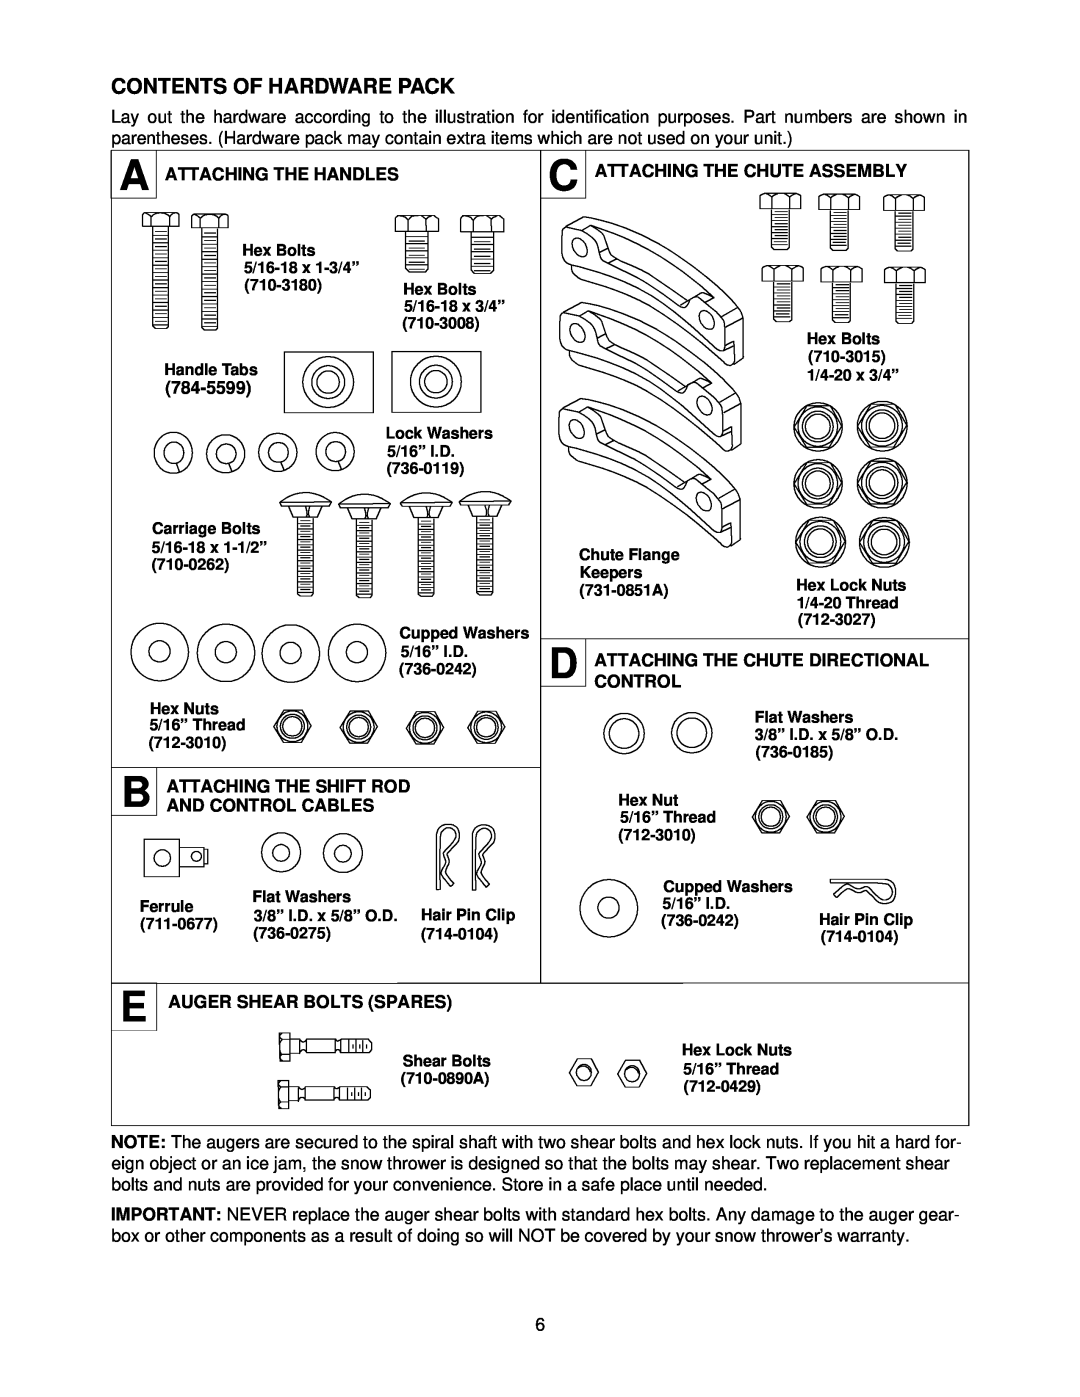 MTD E600E manual Contents Of Hardware Pack, A Attaching The Handles, C Attaching The Chute Assembly, 784-5599, D Control 